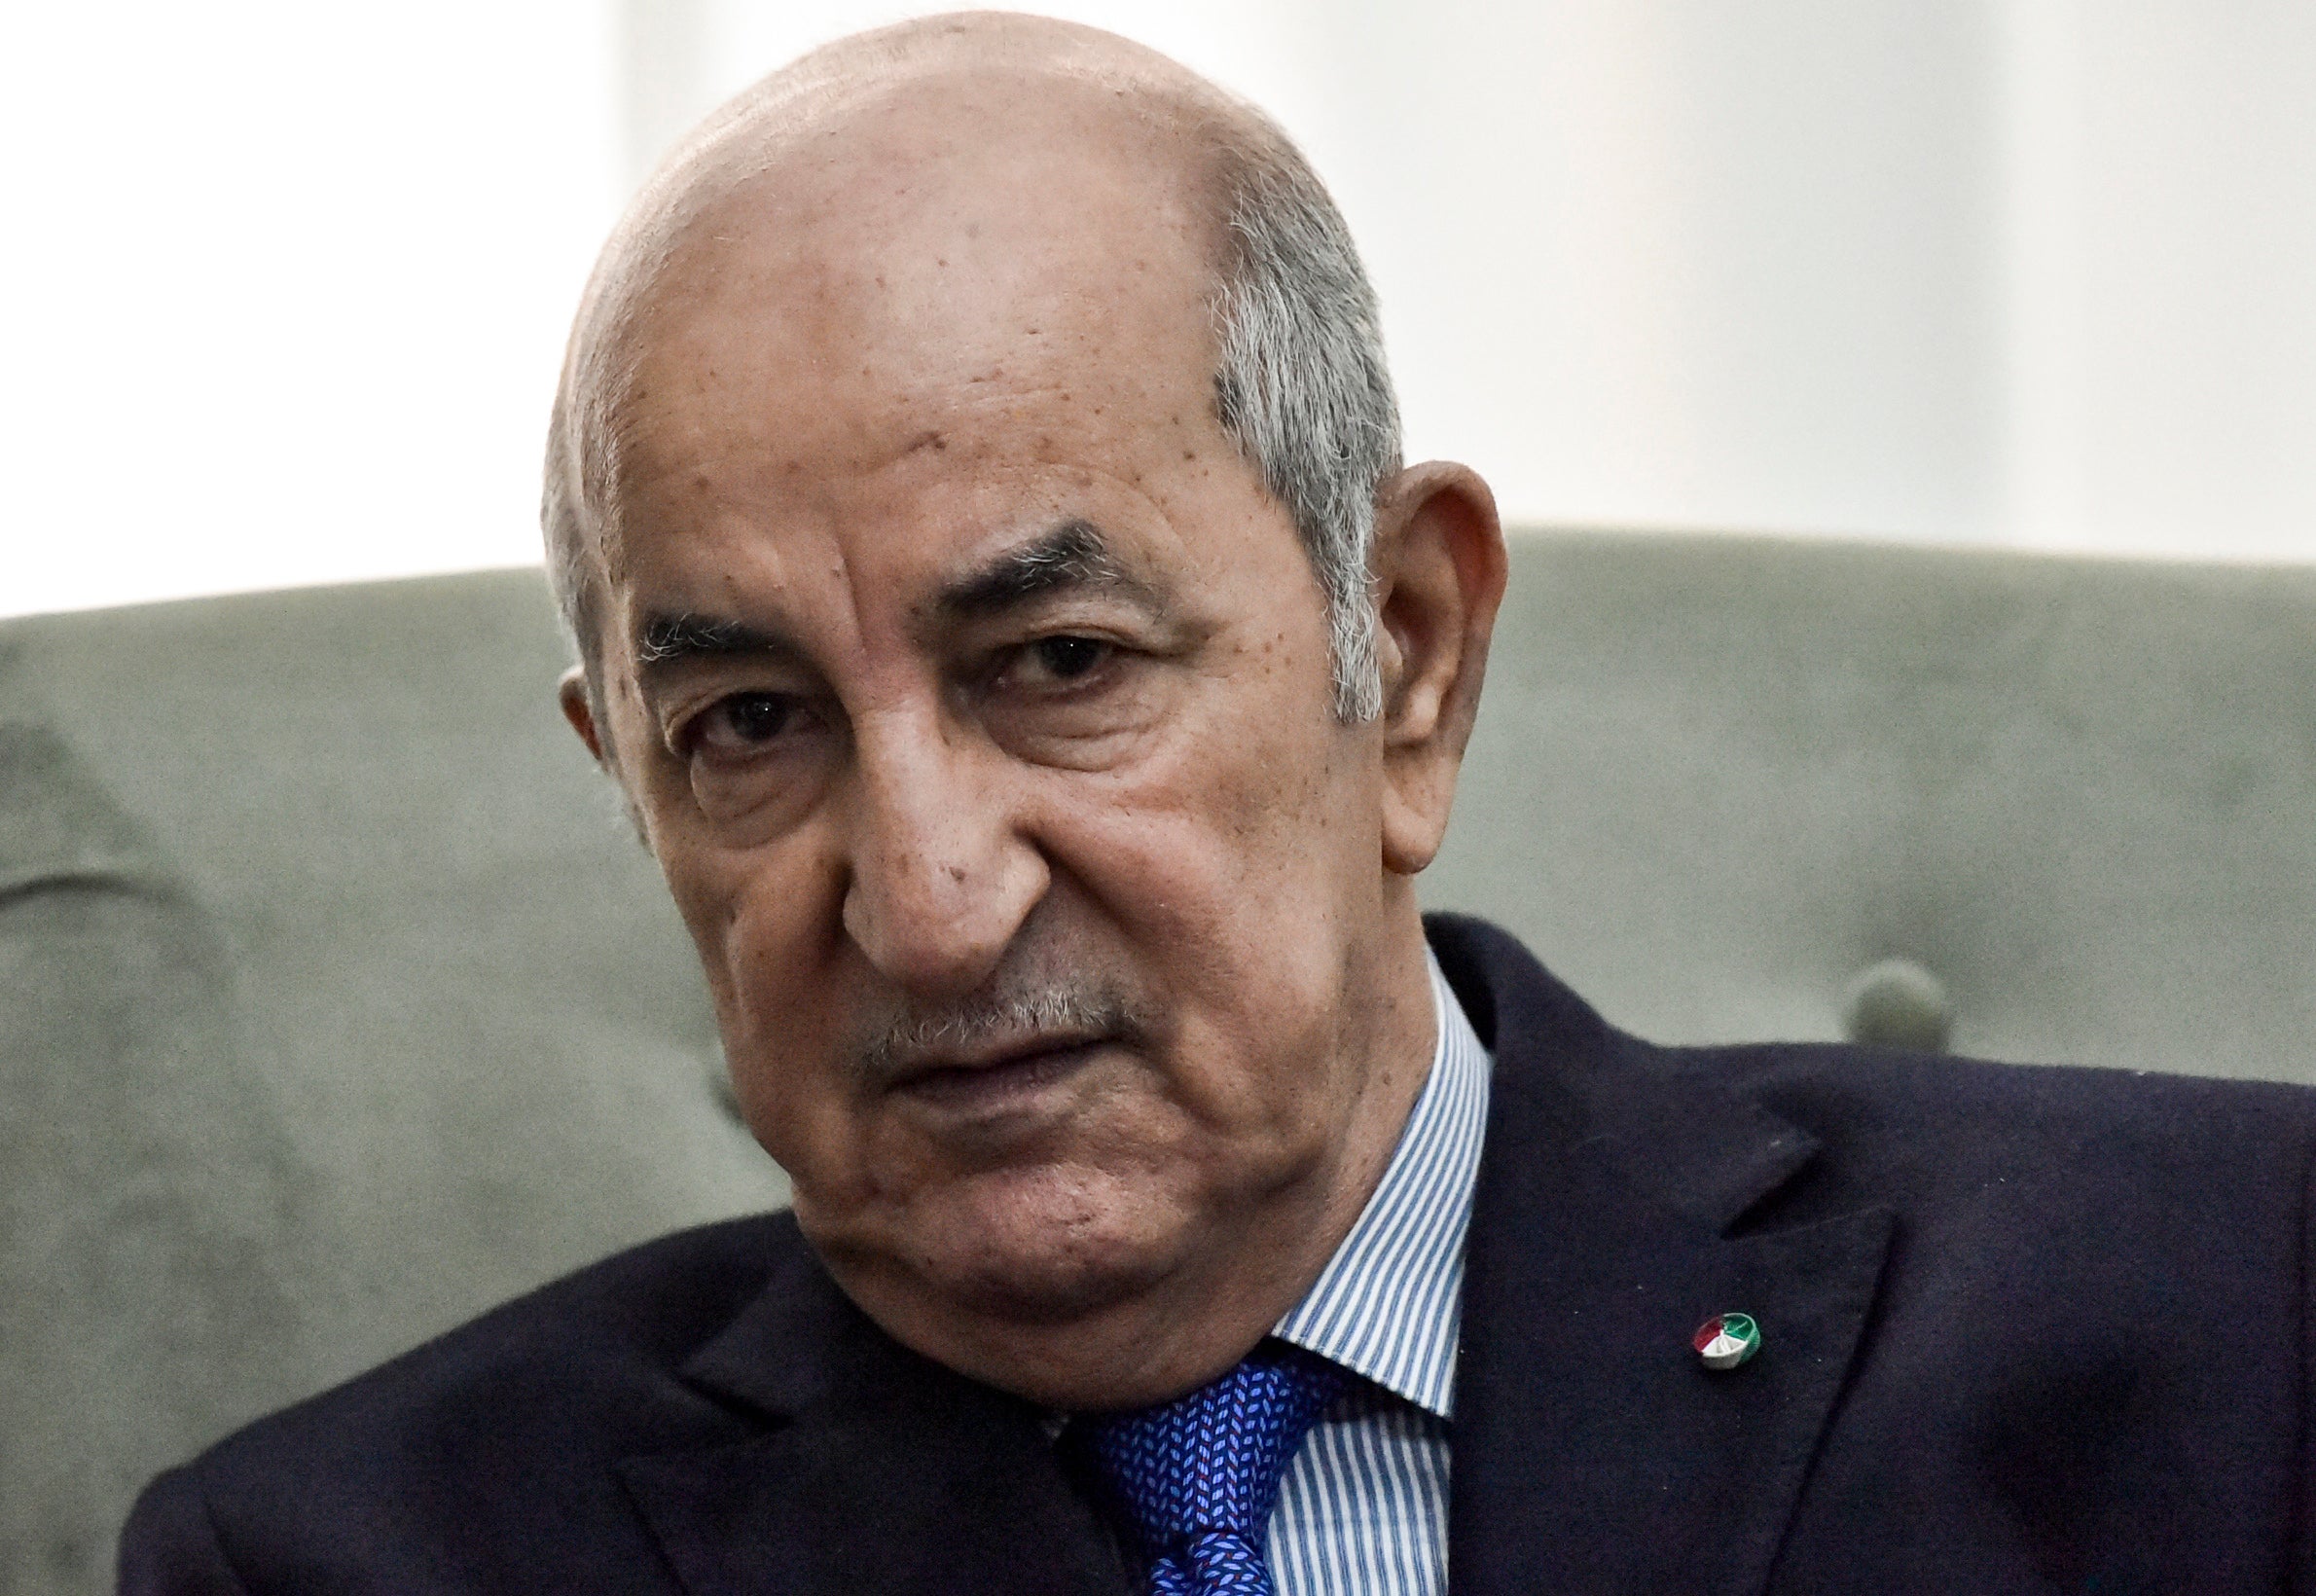 Abdelmadjid Tebboune, the president of Algeria, has been receiving medical treatment in Germany.&nbsp;